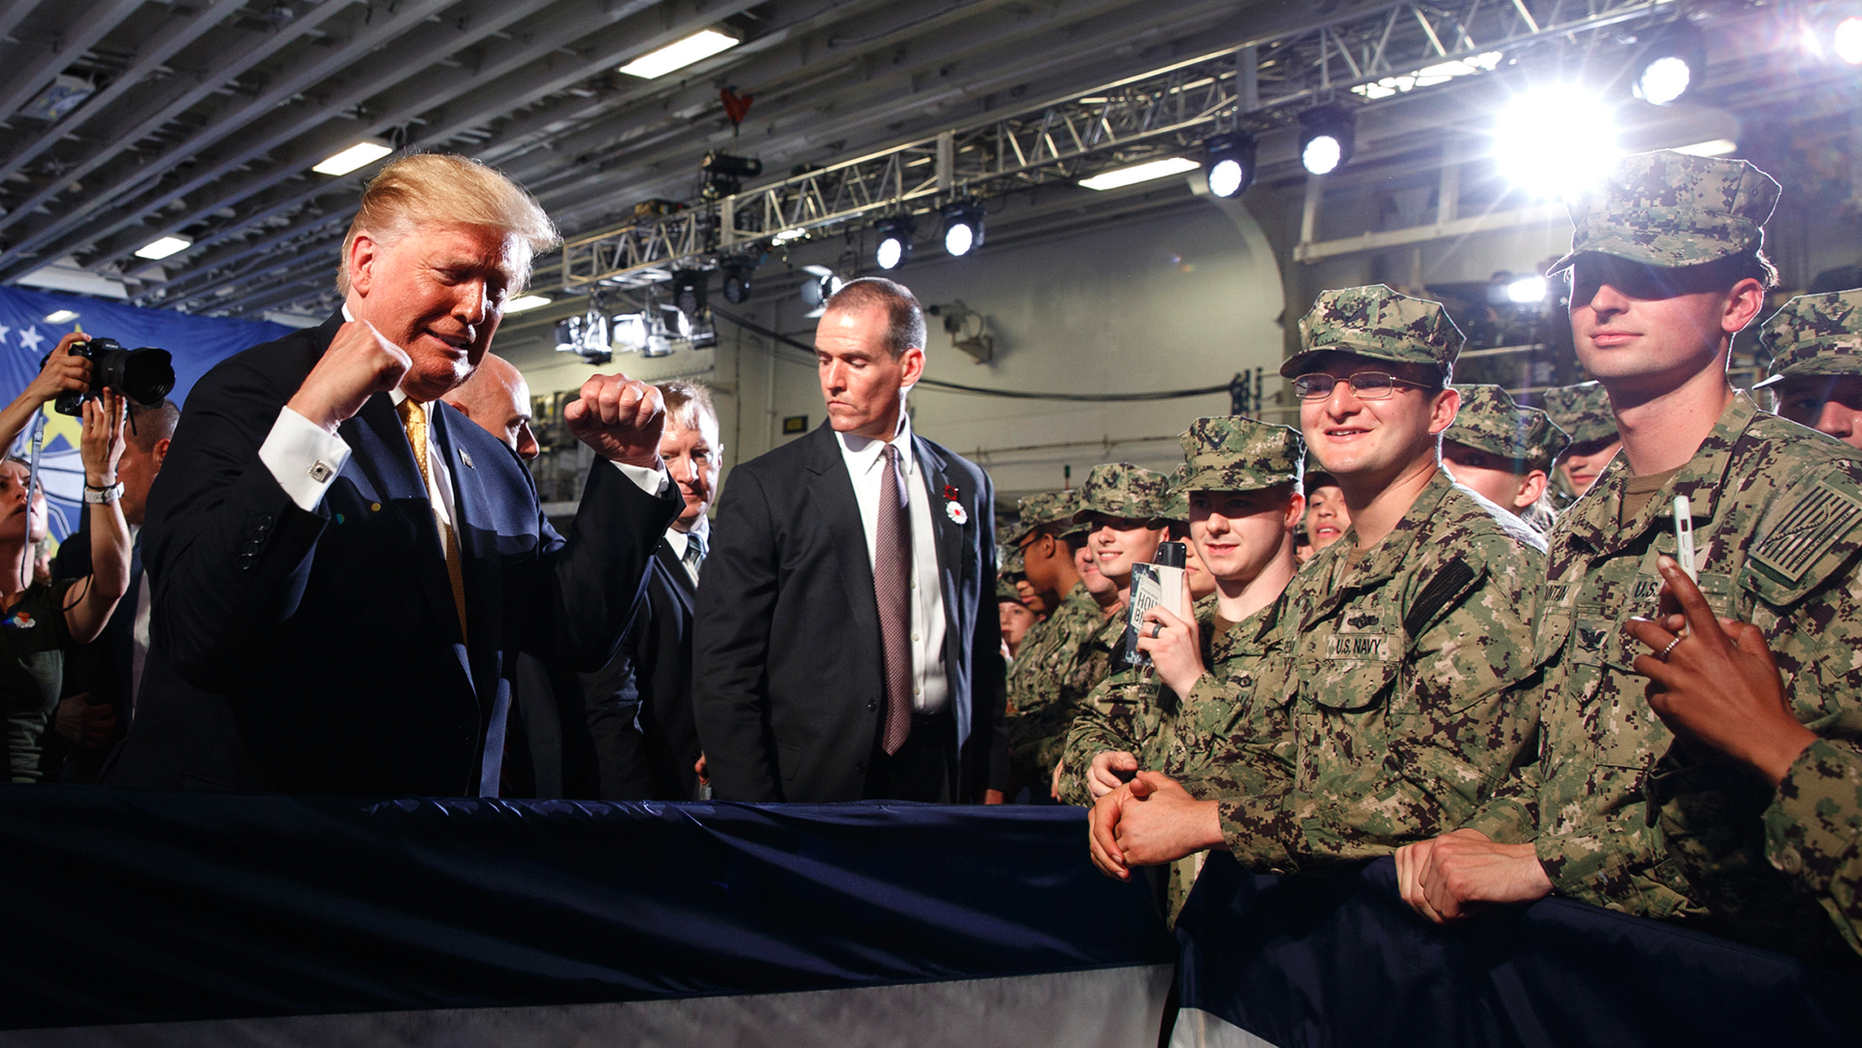 President Donald Trump greets troops after speaking at a Memorial Day event aboard the USS Wasp, Tuesday, May 28, 2019, in Yokosuka, Japan. (AP Photo/Evan Vucci)